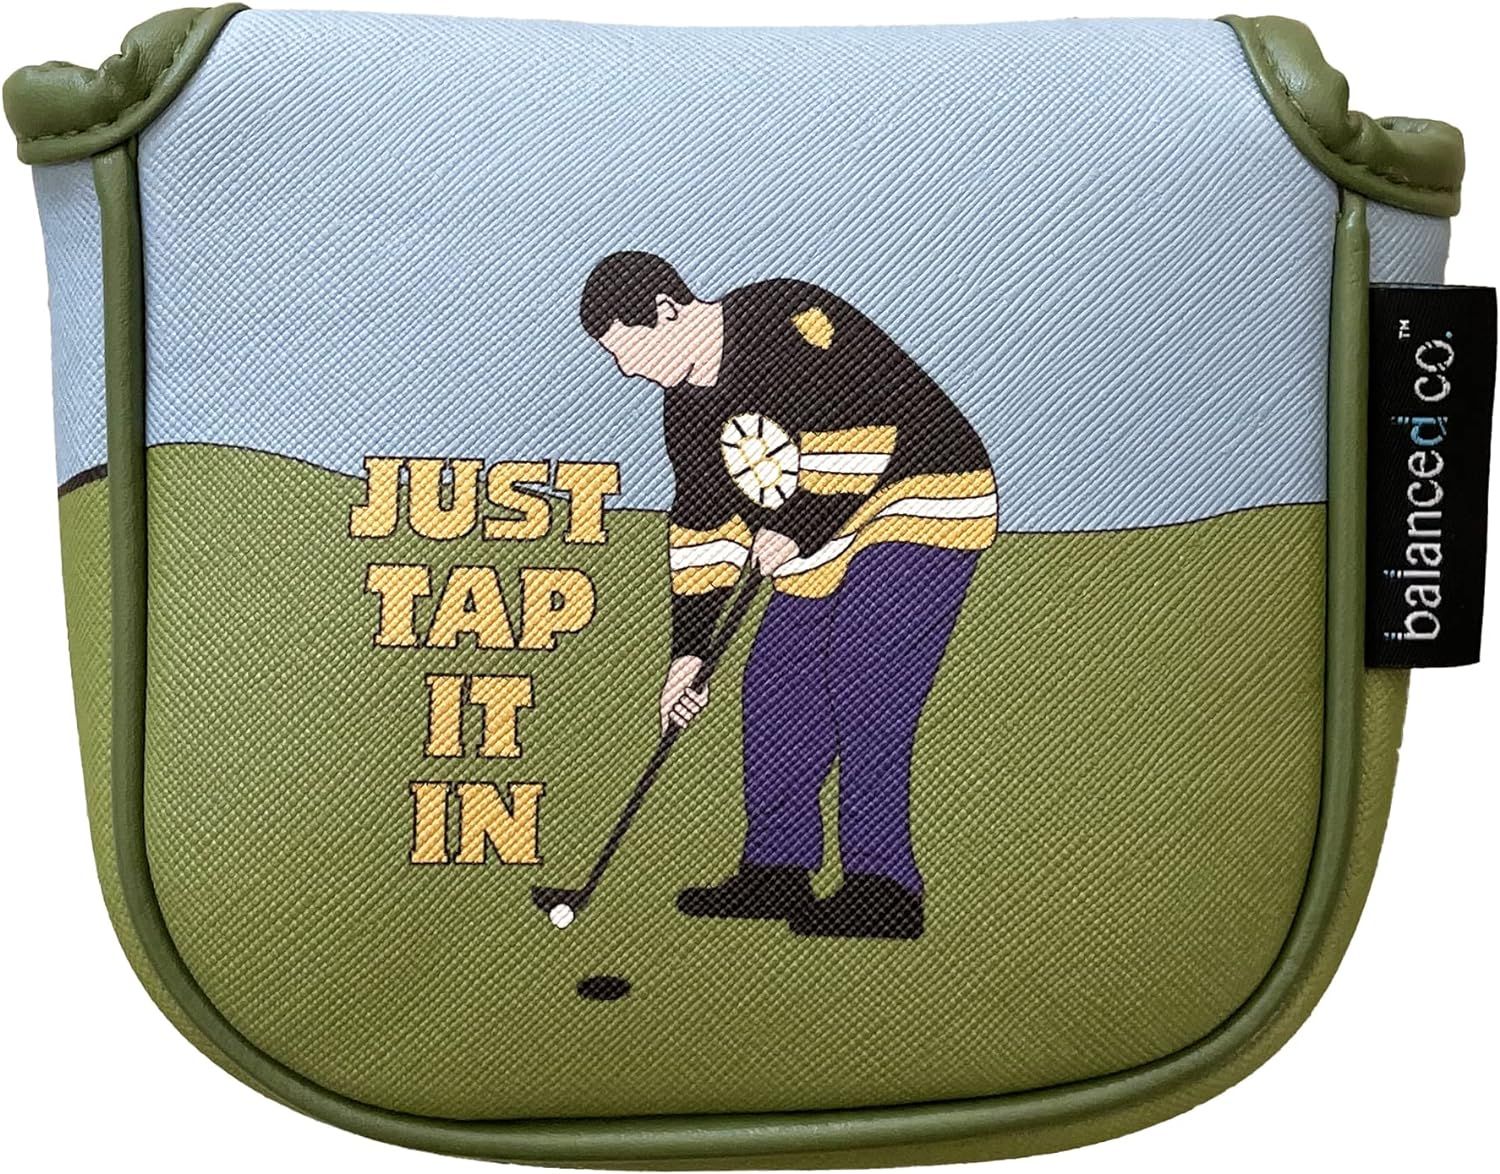 Balanced Co. Funny Golf Putter Headcover | Amazon (US)